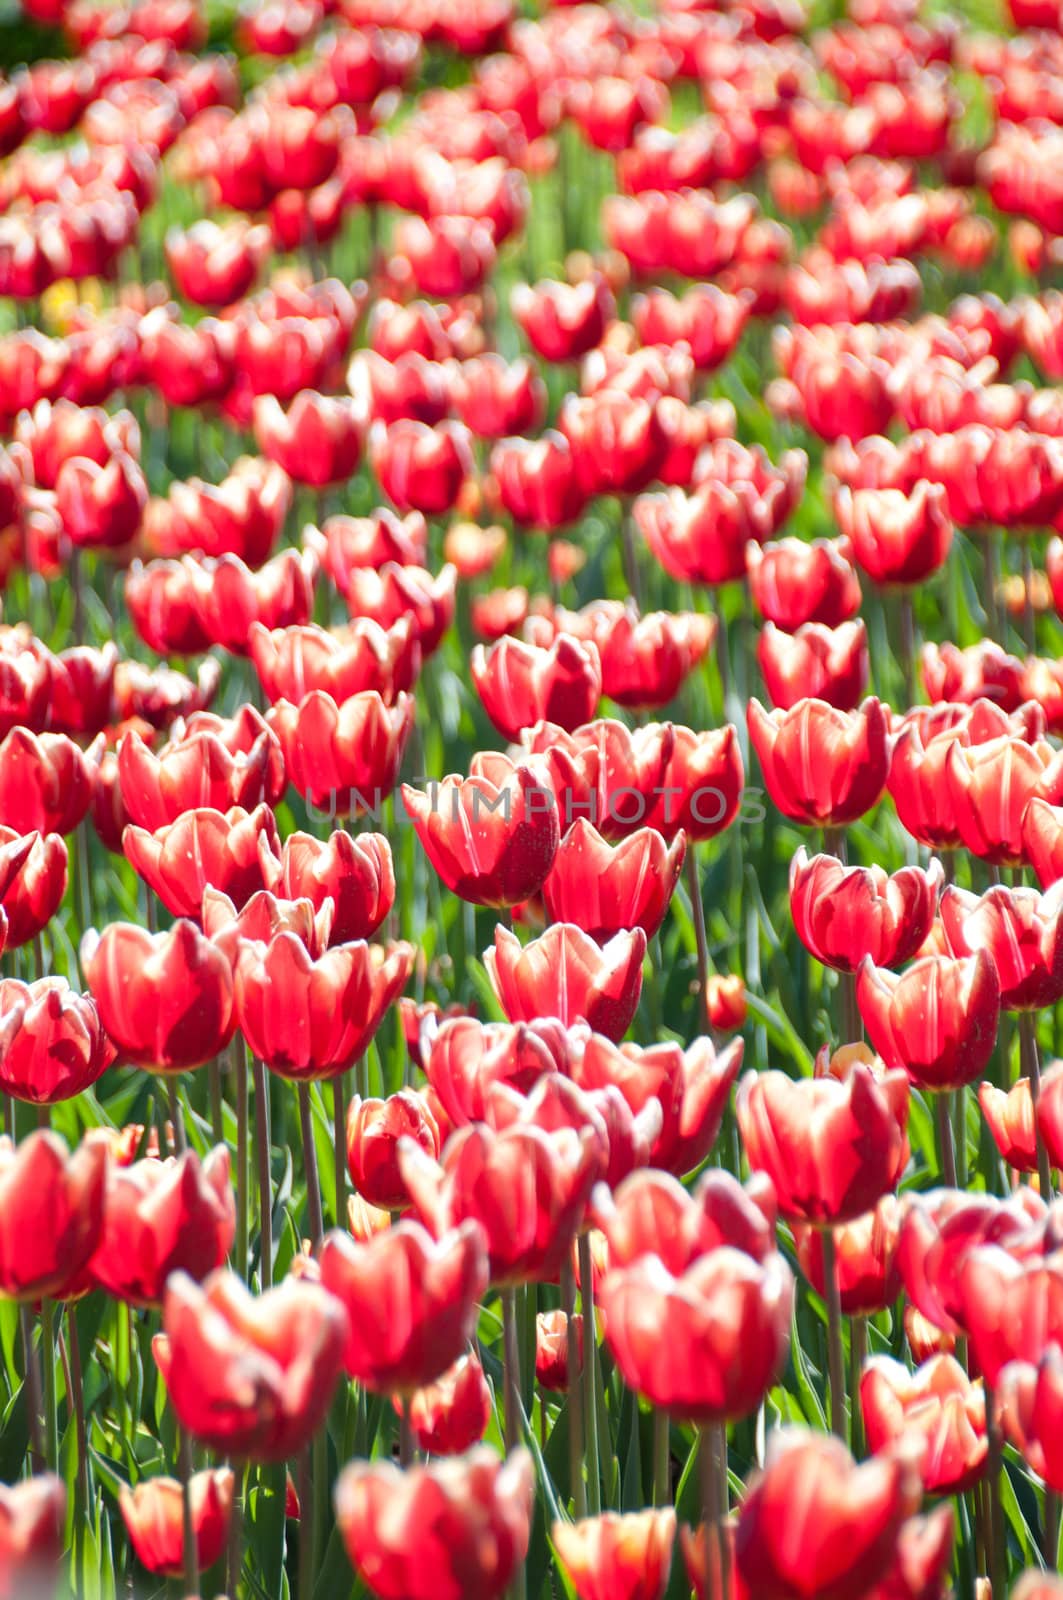 Tulips heads with red and white vertical pattern